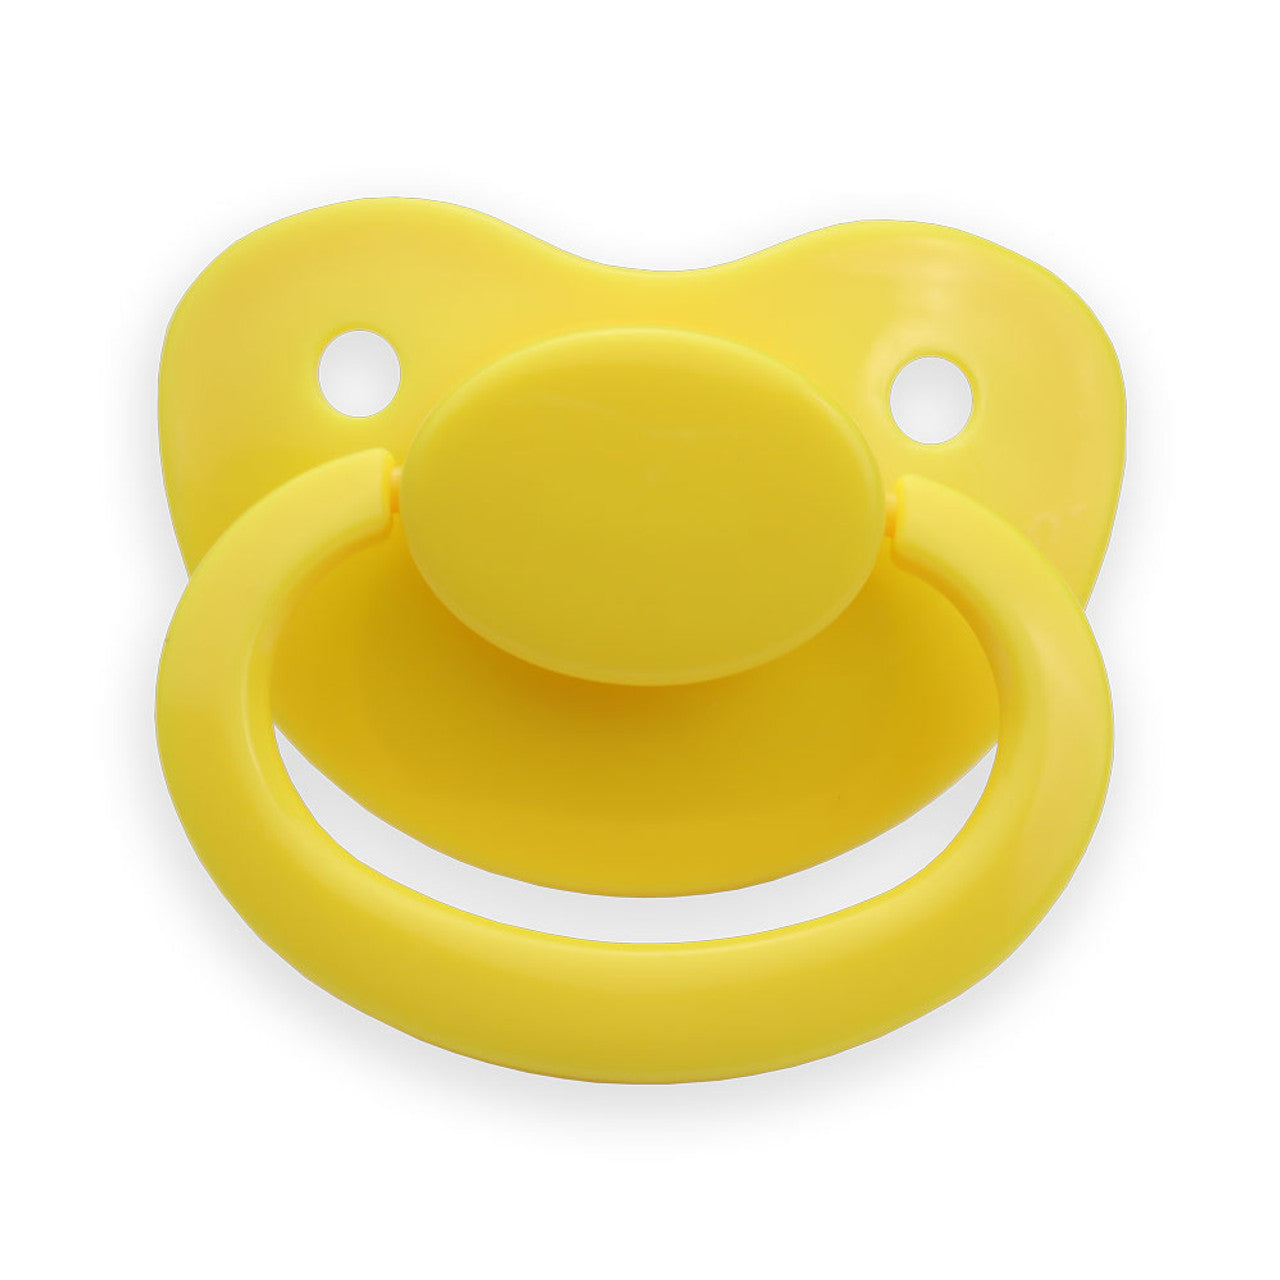 Adult Size 6 Pacifier yellow